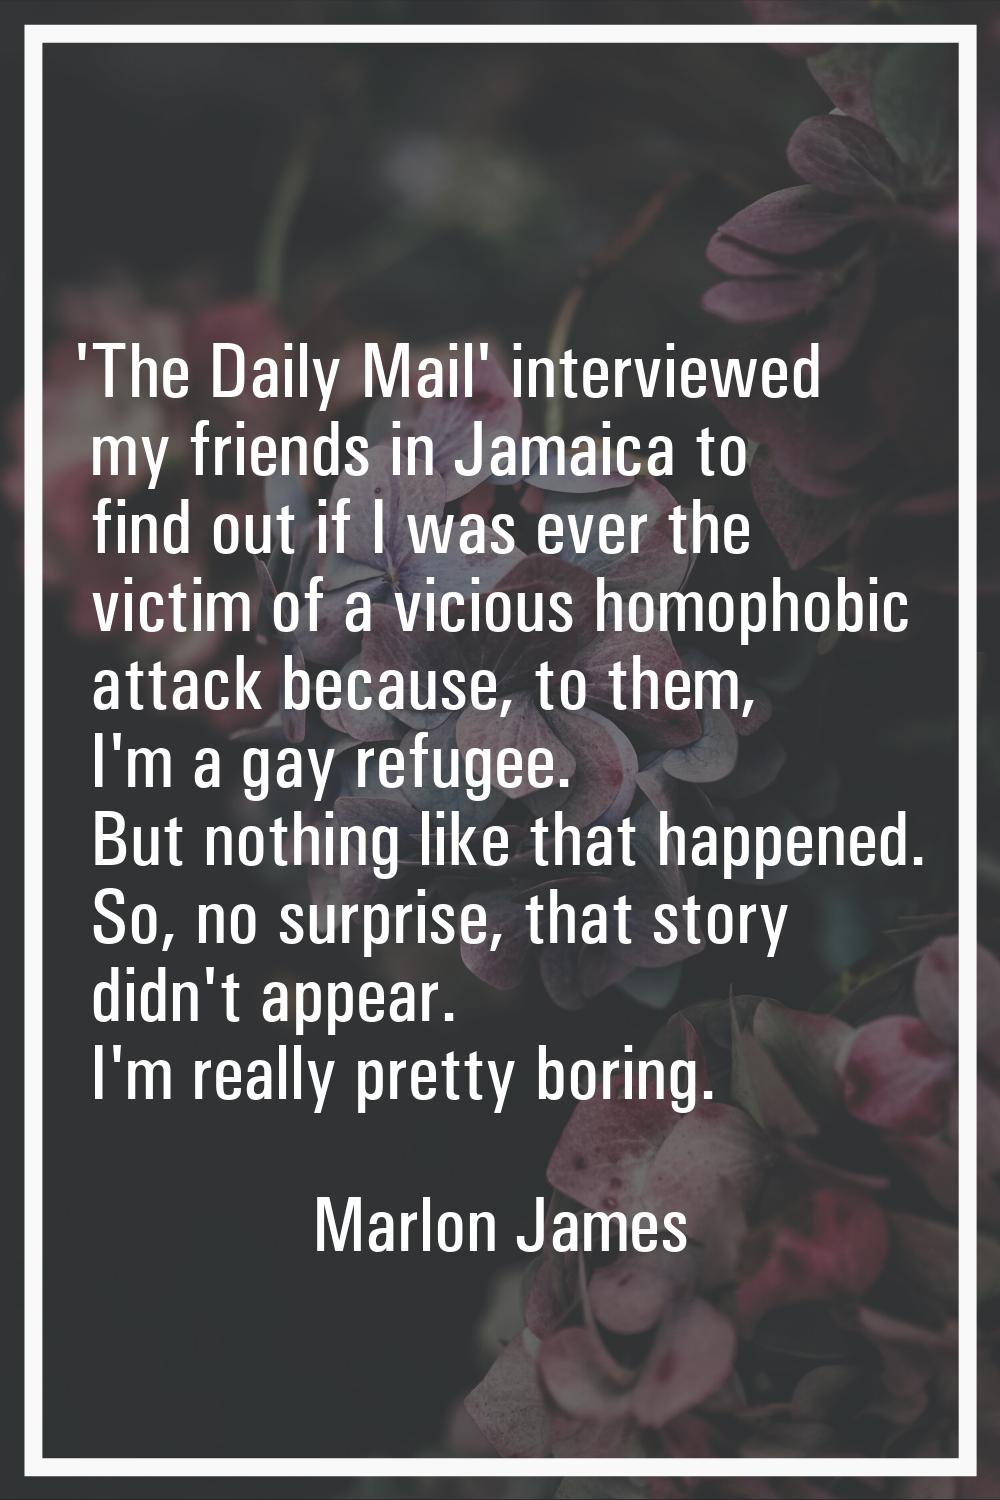 'The Daily Mail' interviewed my friends in Jamaica to find out if I was ever the victim of a viciou